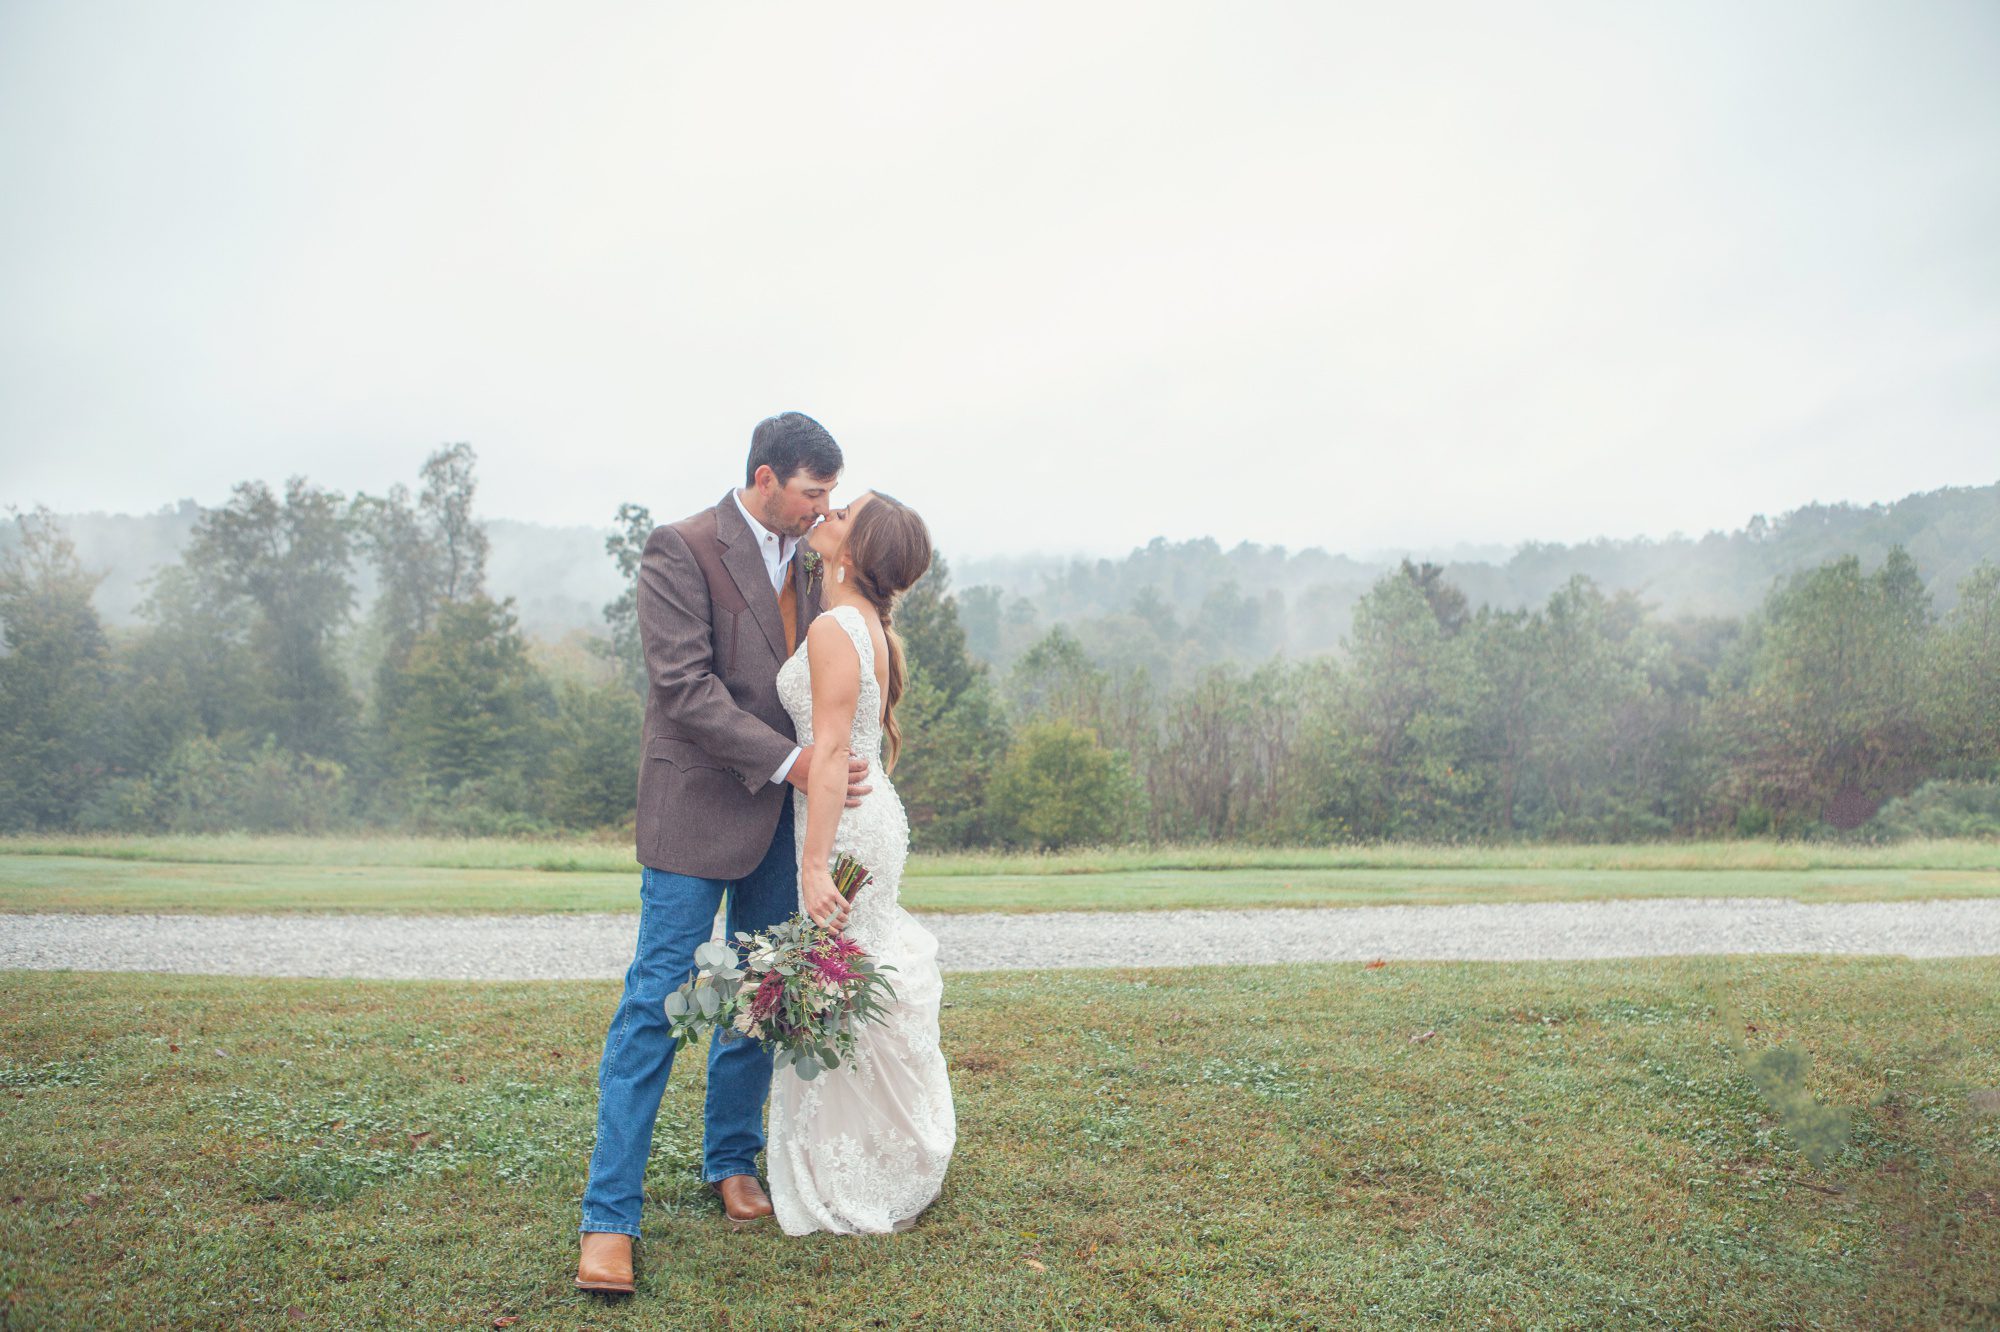 Bride and groom pose for photo in mist before wedding reception details before wedding ceremony photography at Front Porch Farms, Wedding photography by Krista Lee